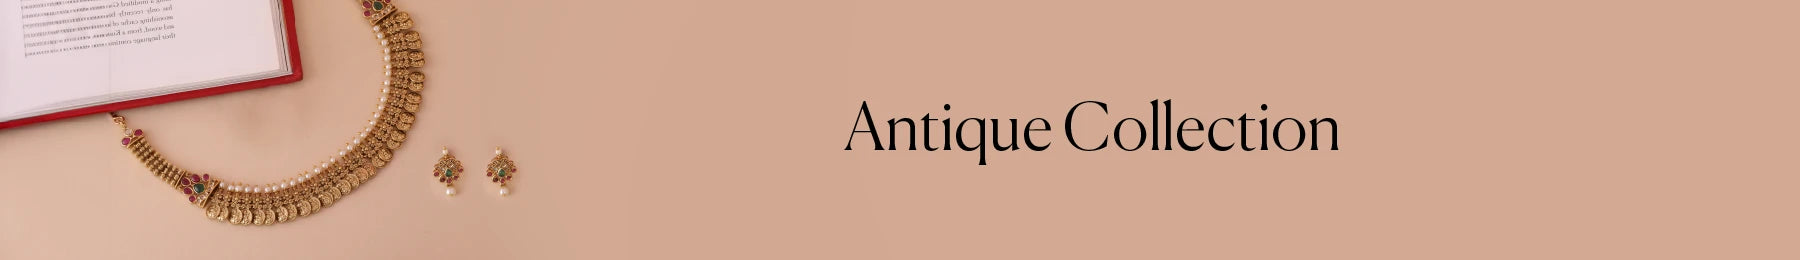 Antique Jewellery Collection